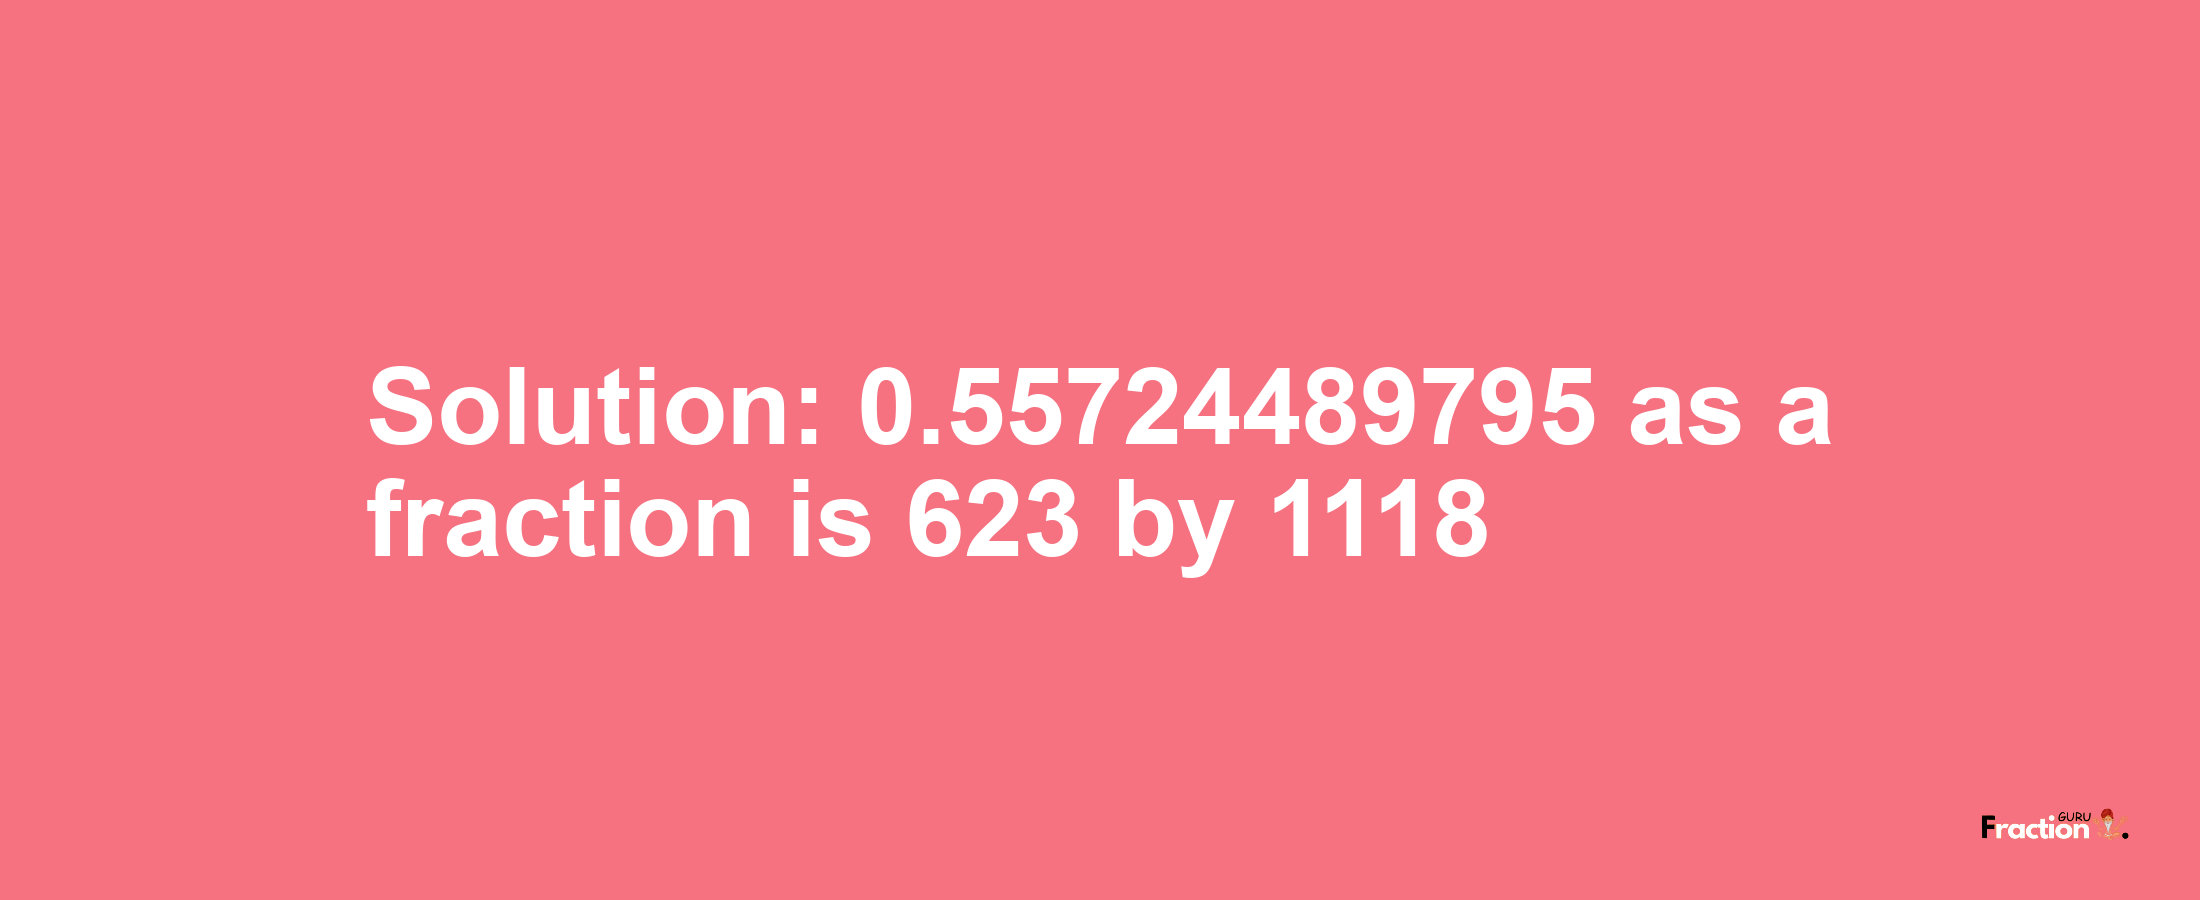 Solution:0.55724489795 as a fraction is 623/1118